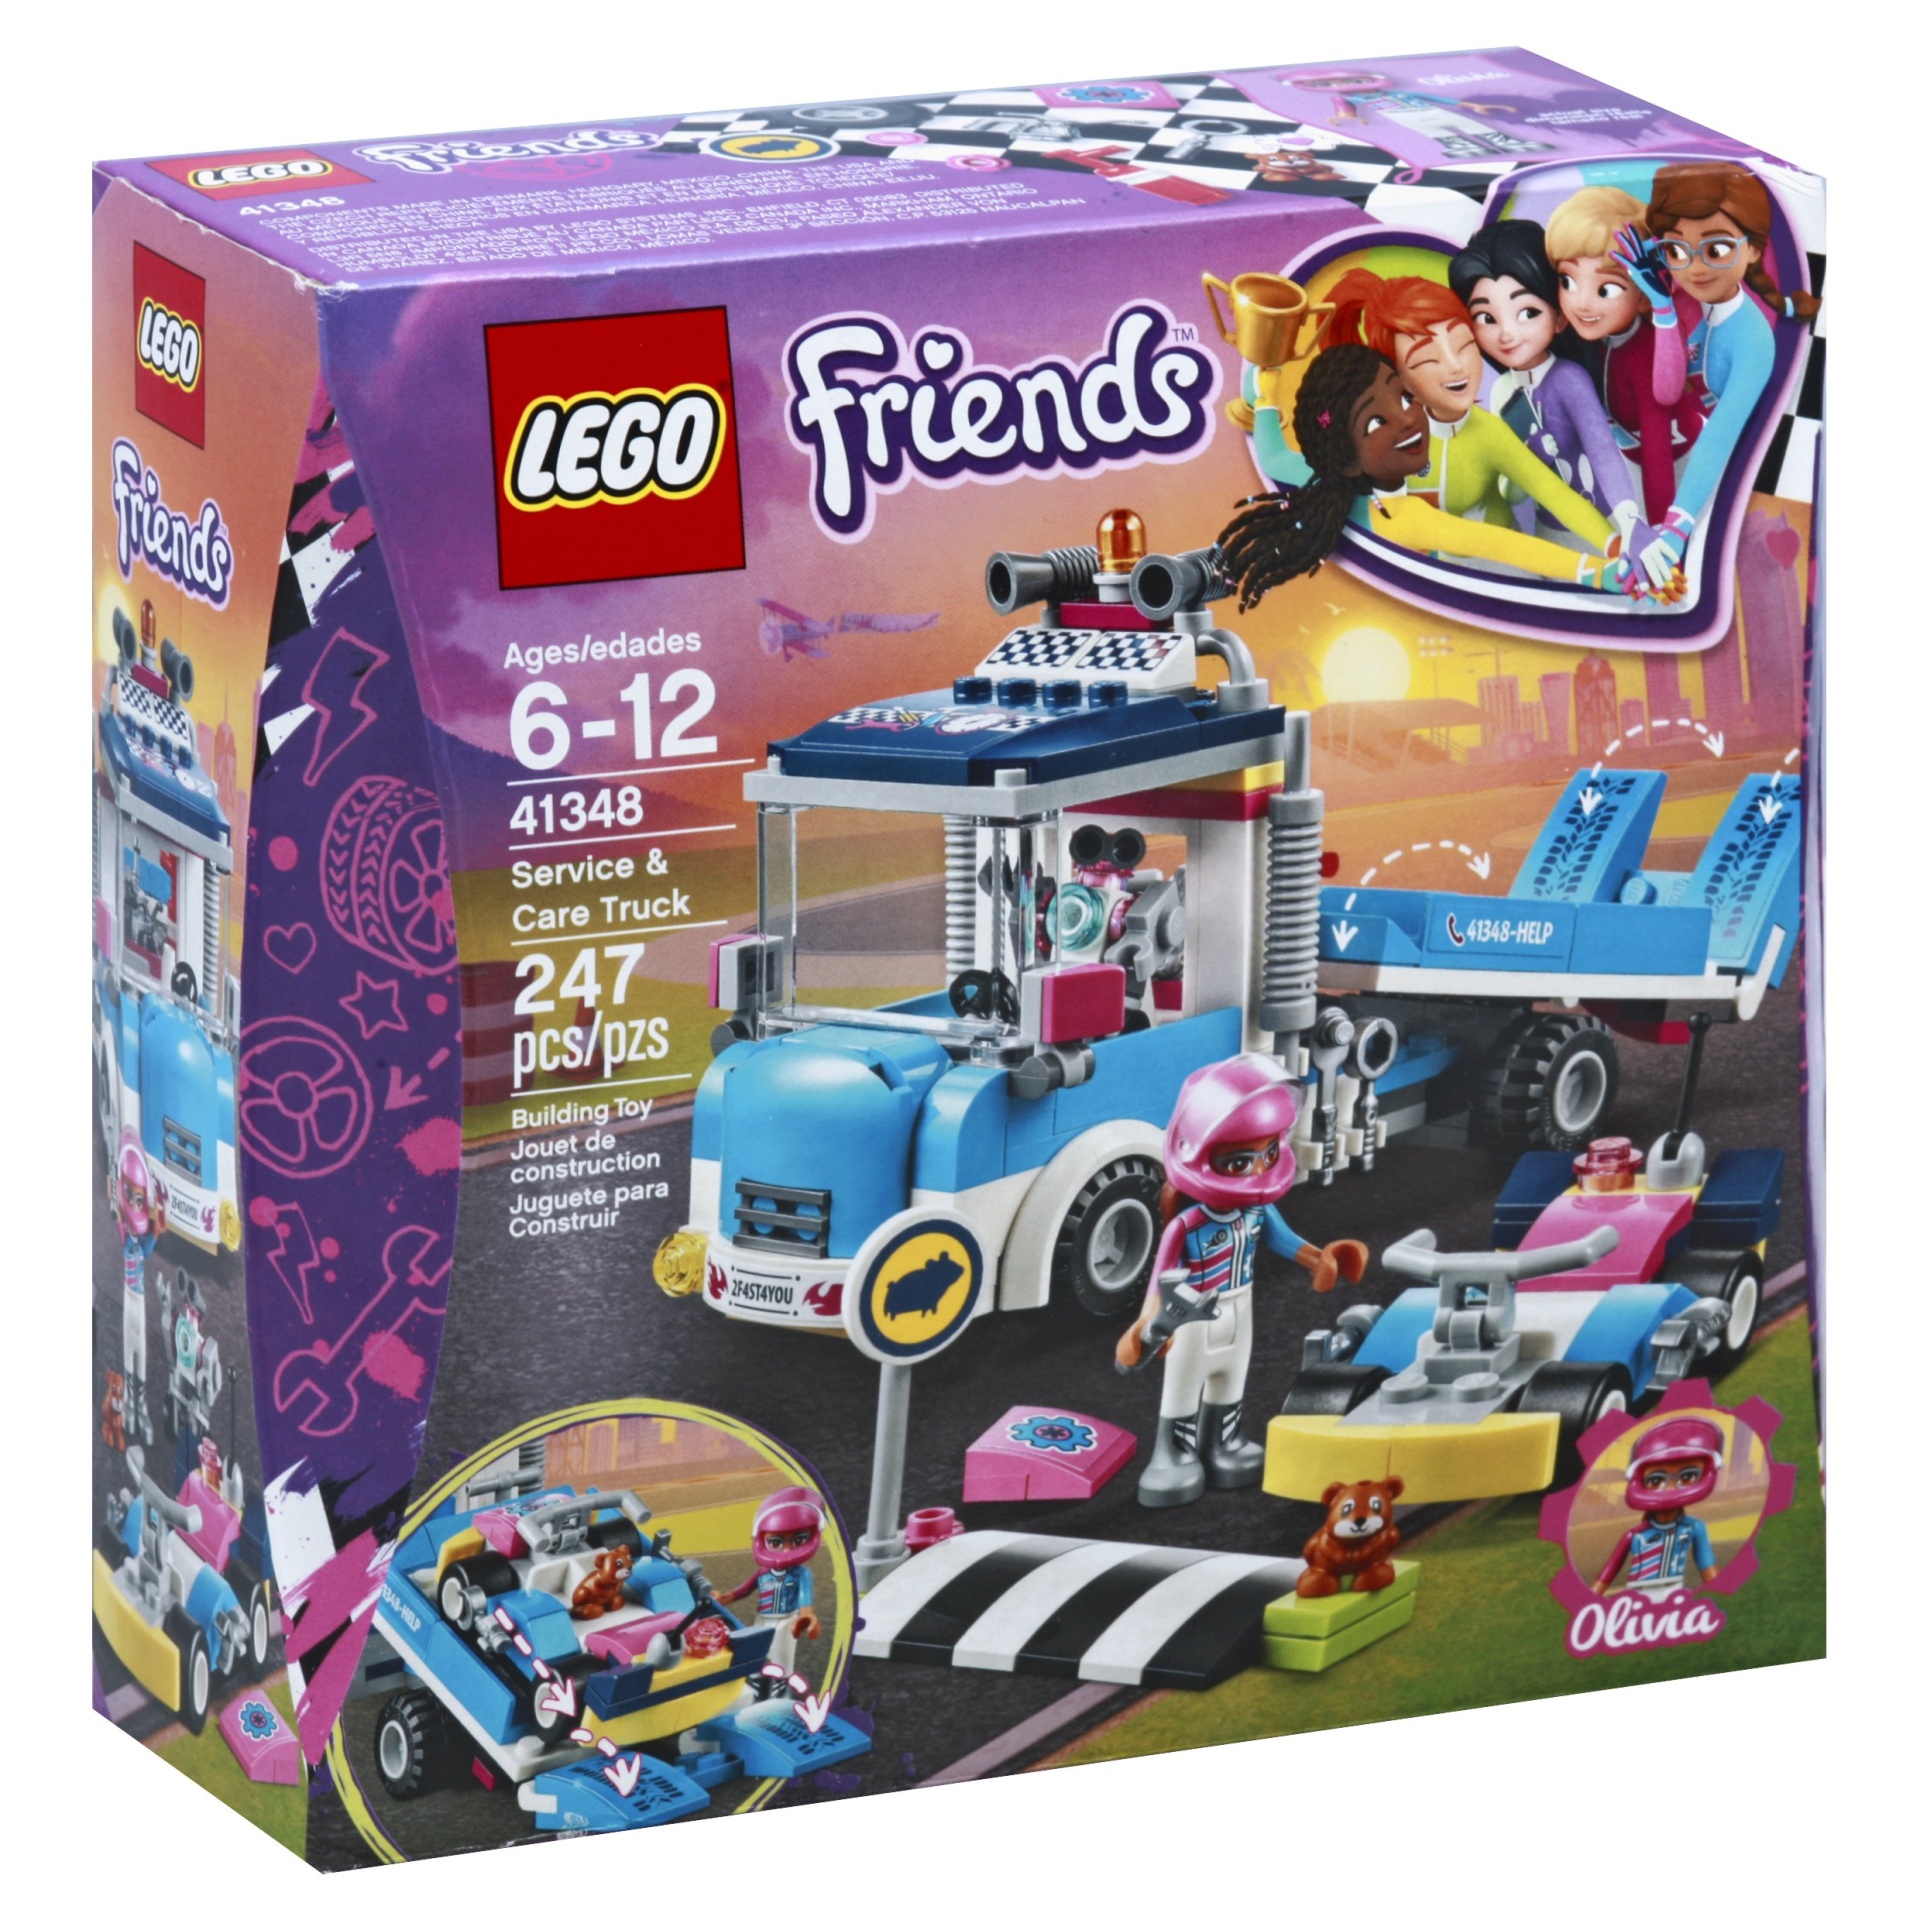 slide 1 of 1, LEGO Friends Service & Care Truck 41348, 1 ct